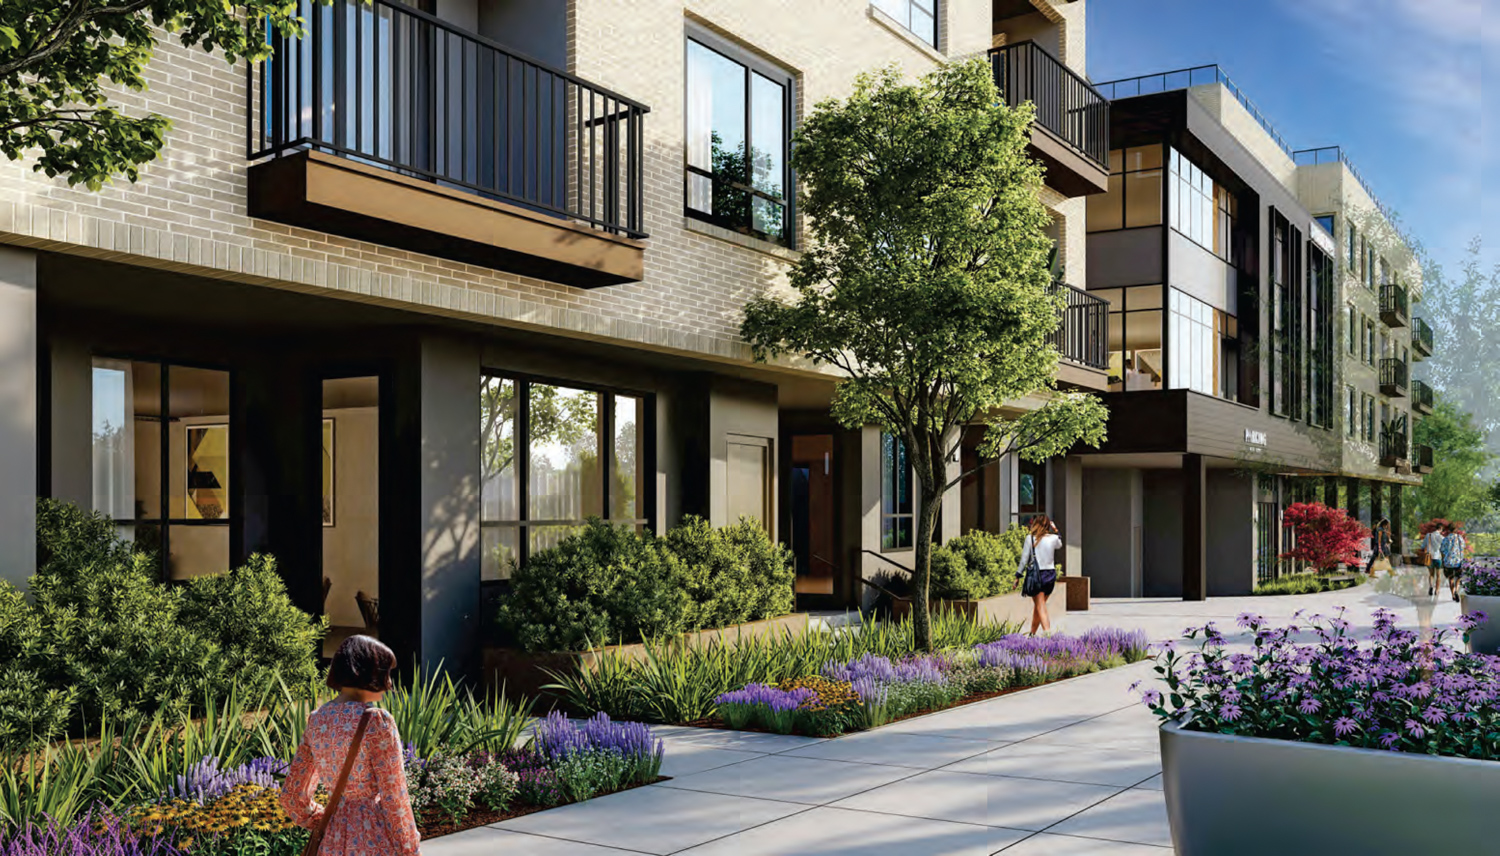 11 El Camino Real courtyard view, rendering by KTGY